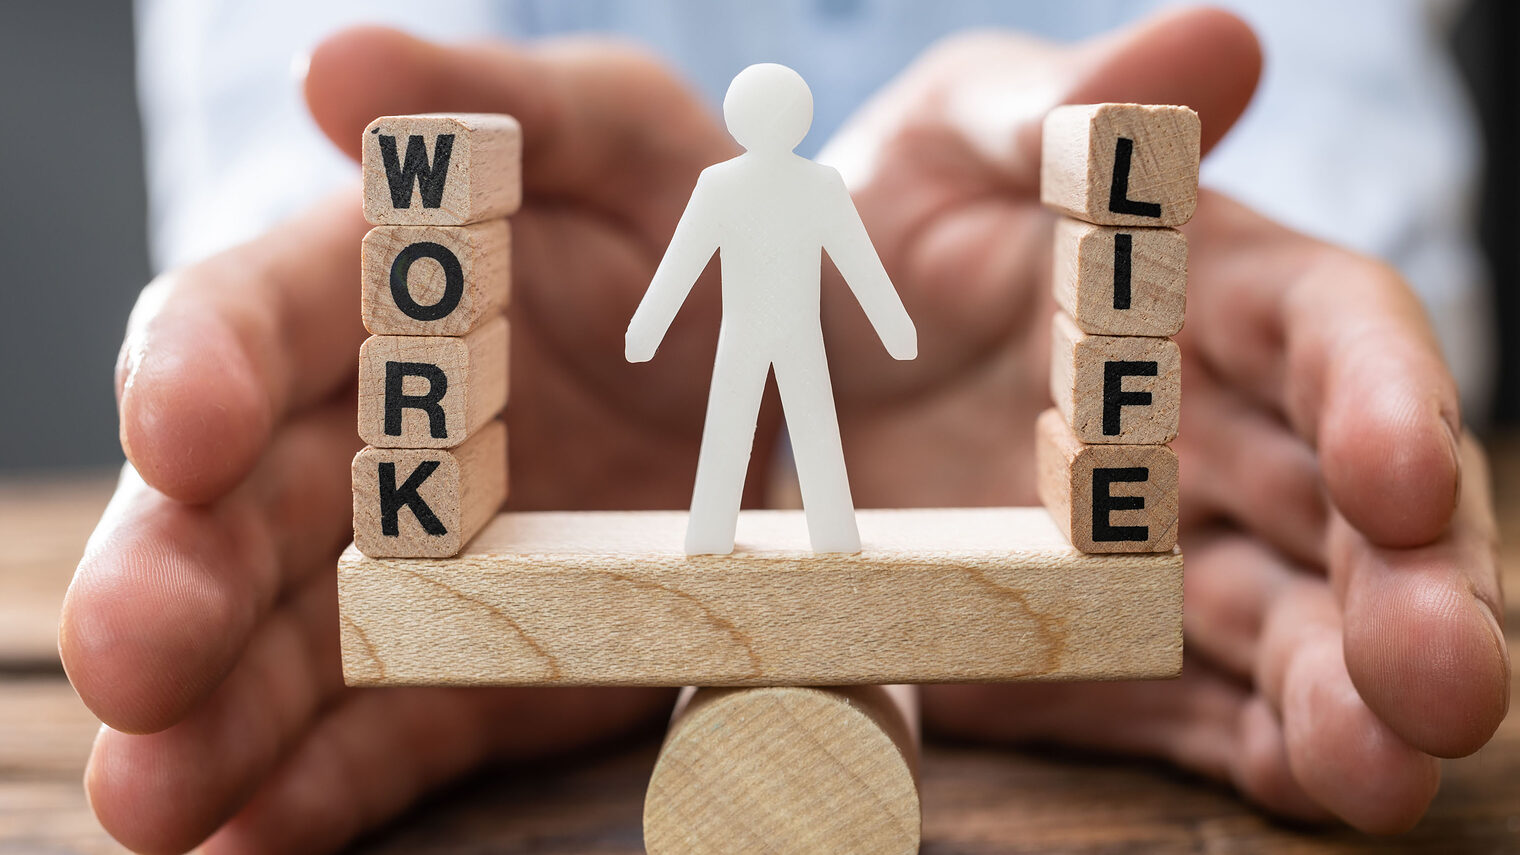 Work Life Balance Protection Concept. Lifestyle Choice Schlagwort(e): balance, life, protection, concept, choice, workplace, human, seesaw, compare, man, office, select, weight, plan, choose, measure, job, corporate, block, desk